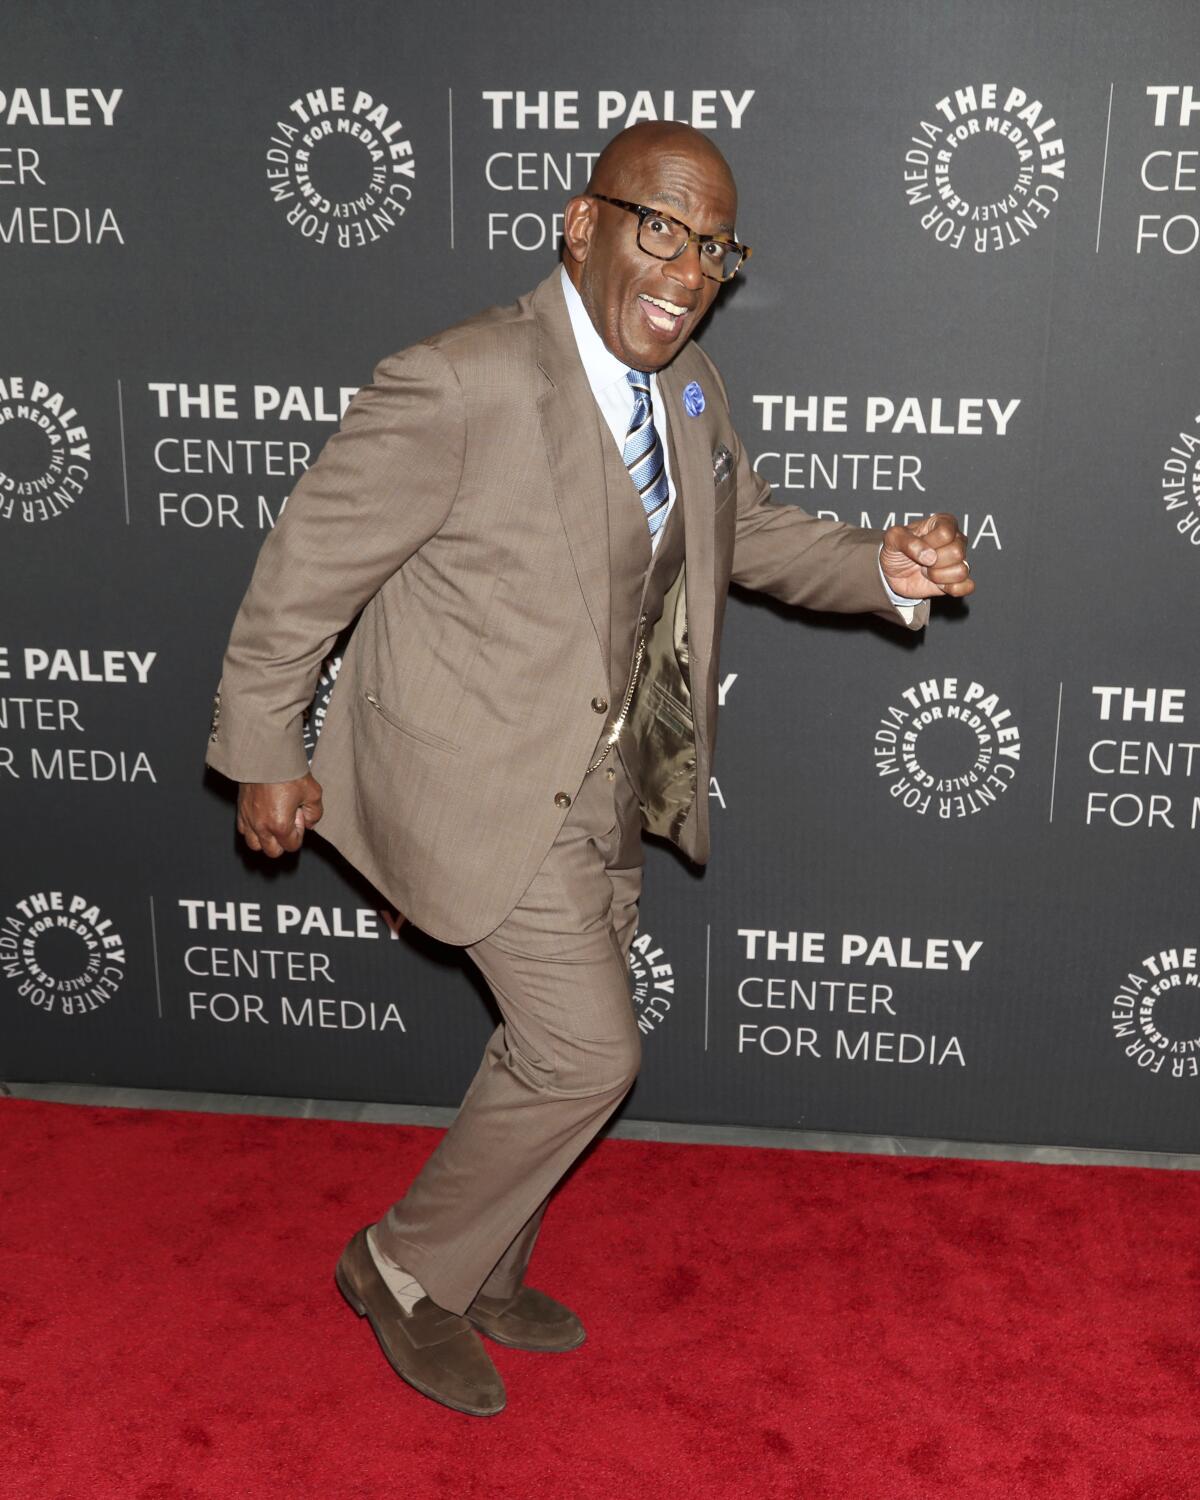 A man in a brown three-piece suit smiles and goofs around on a red carpet